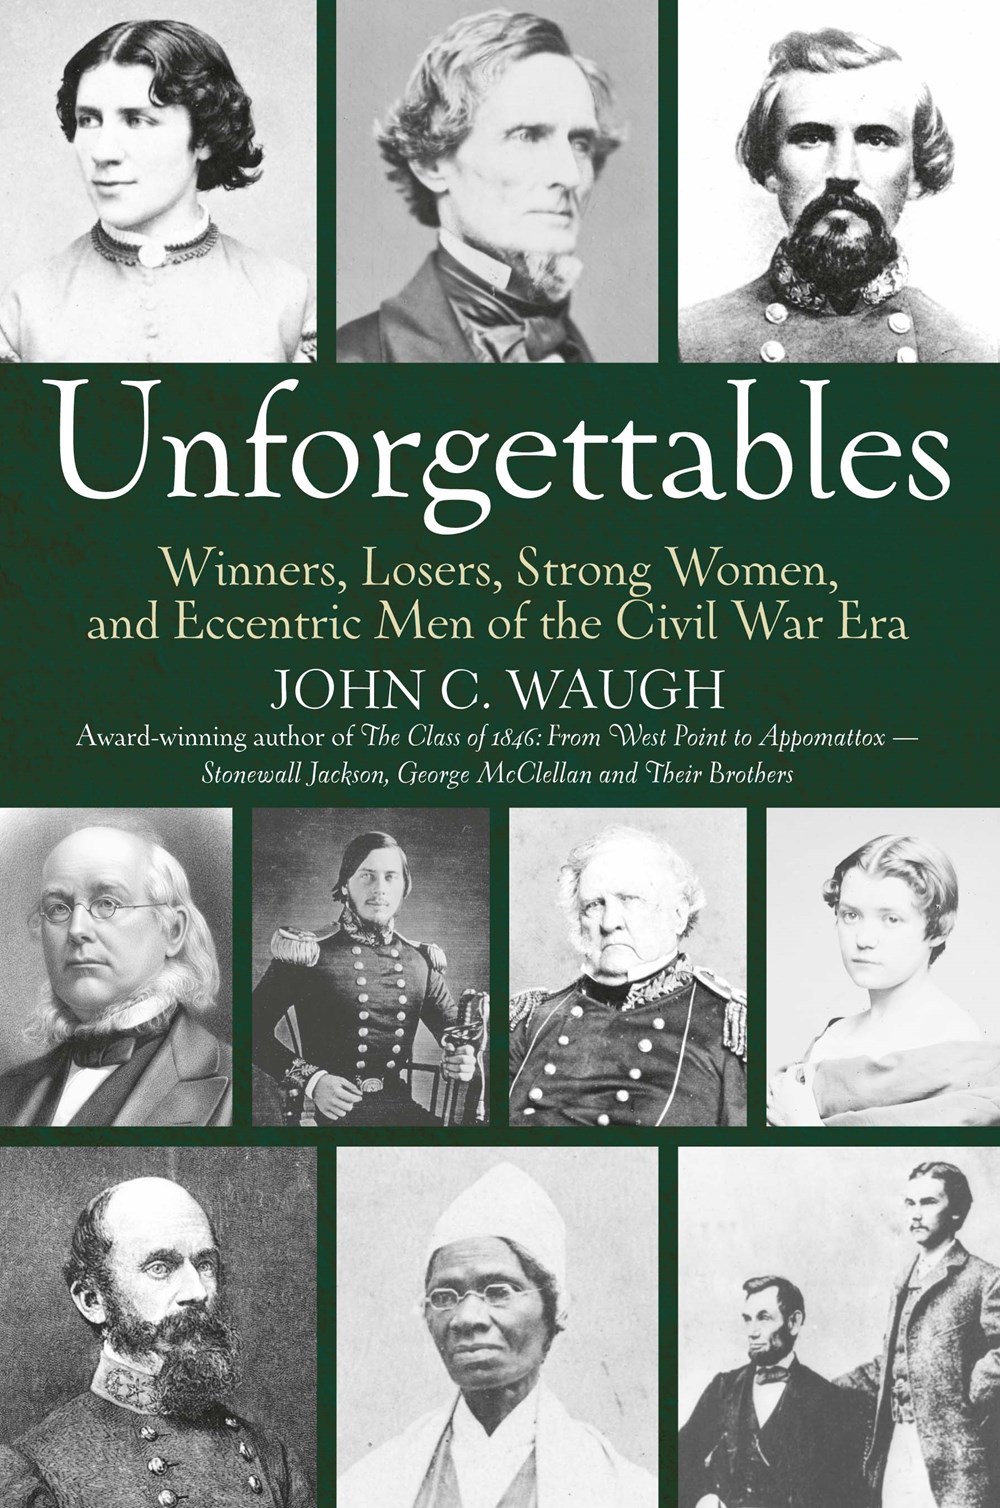 Unforgettables: Winners, Losers, Strong Women, and Eccentric Men of the Civil War Era